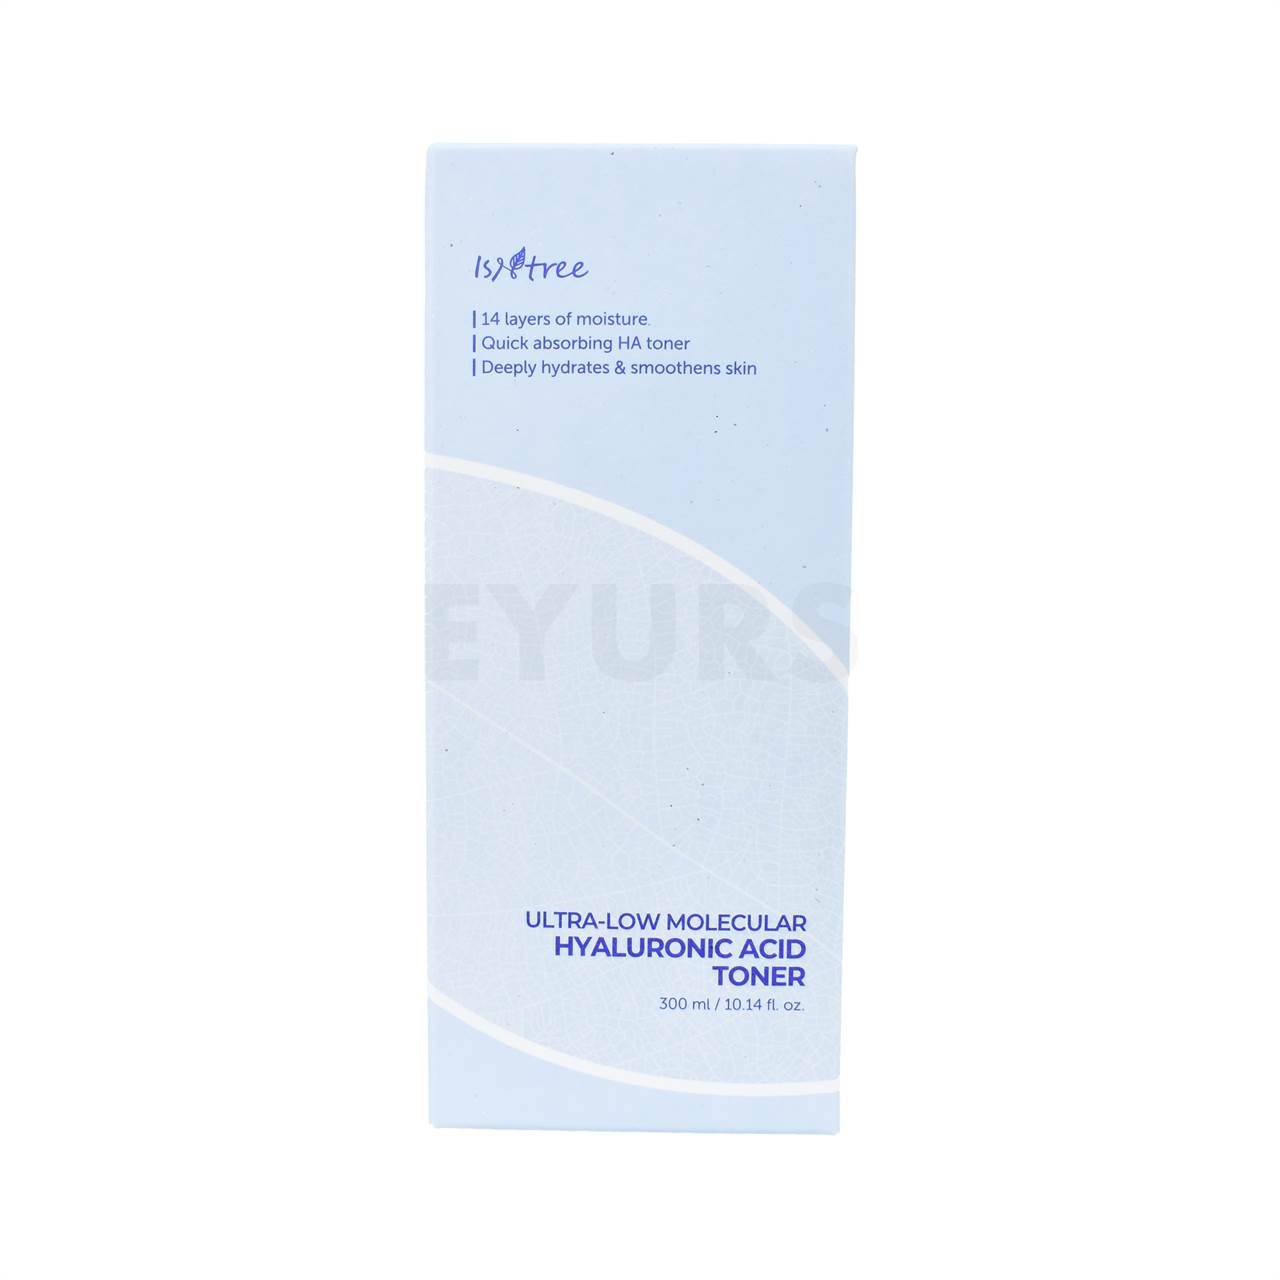 isntree ultra low molecular hyaluronic acid toner 300ml front side packaging